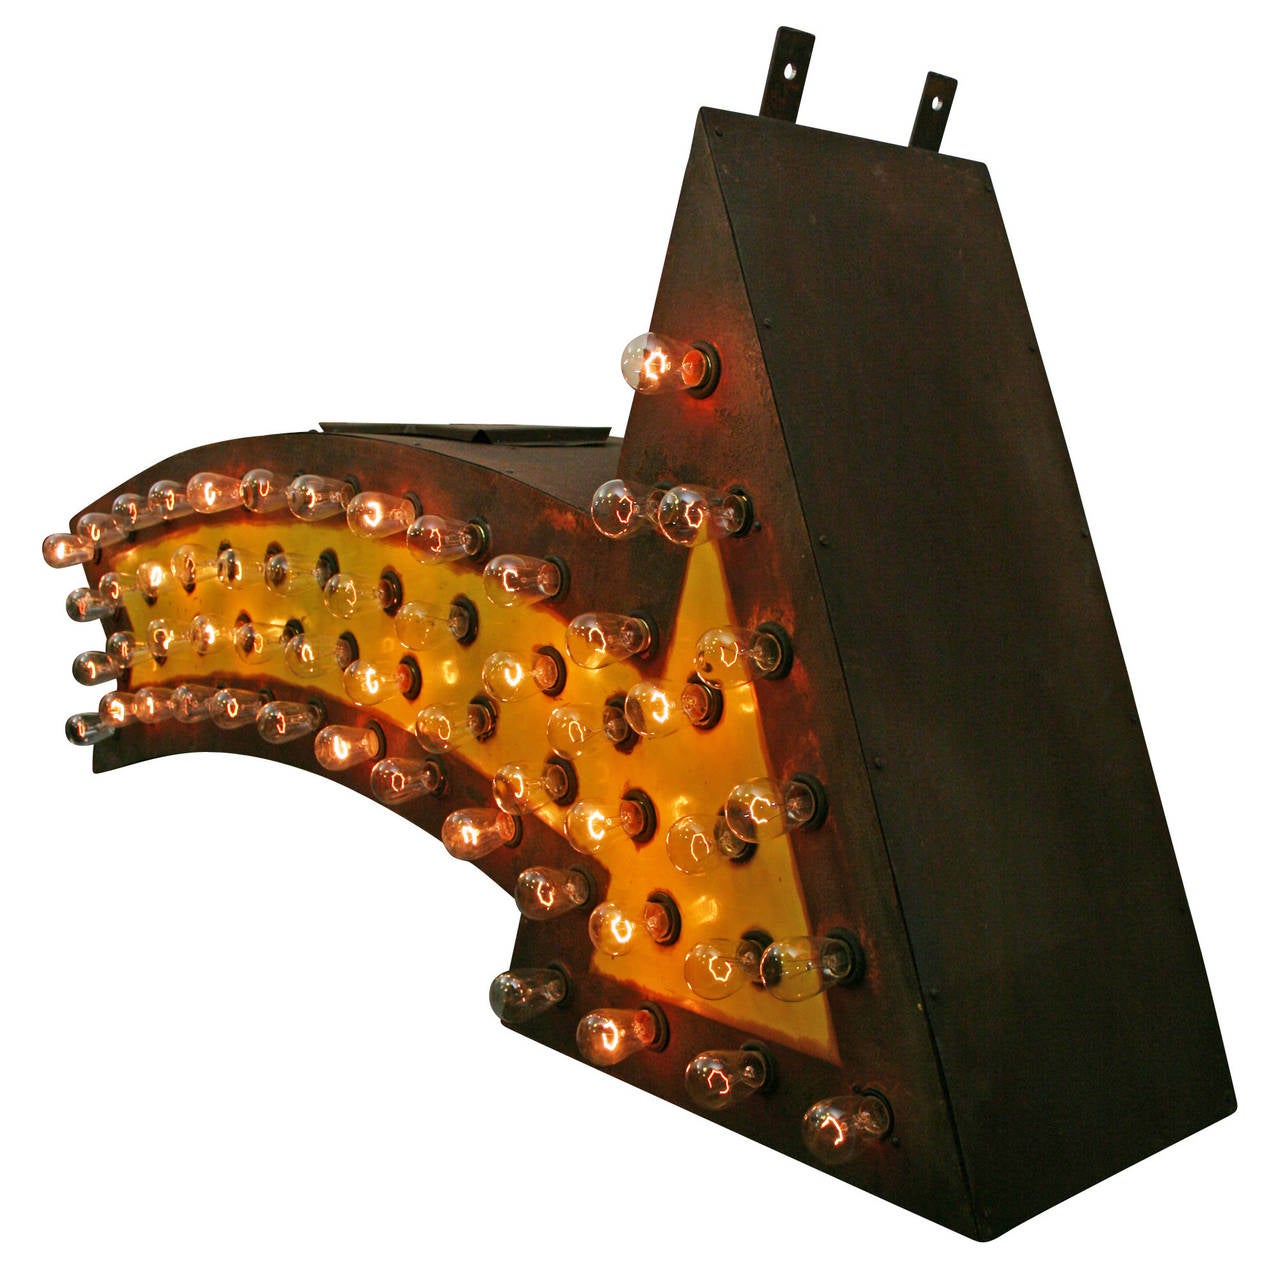 Step right up and bask in the glow of this remarkable carnival arrow sign! Two-sided and two-toned, this lighted sign has been fully restored and now features 110 flickering bulbs (55 on either side), powered by a flicker motor that causes the